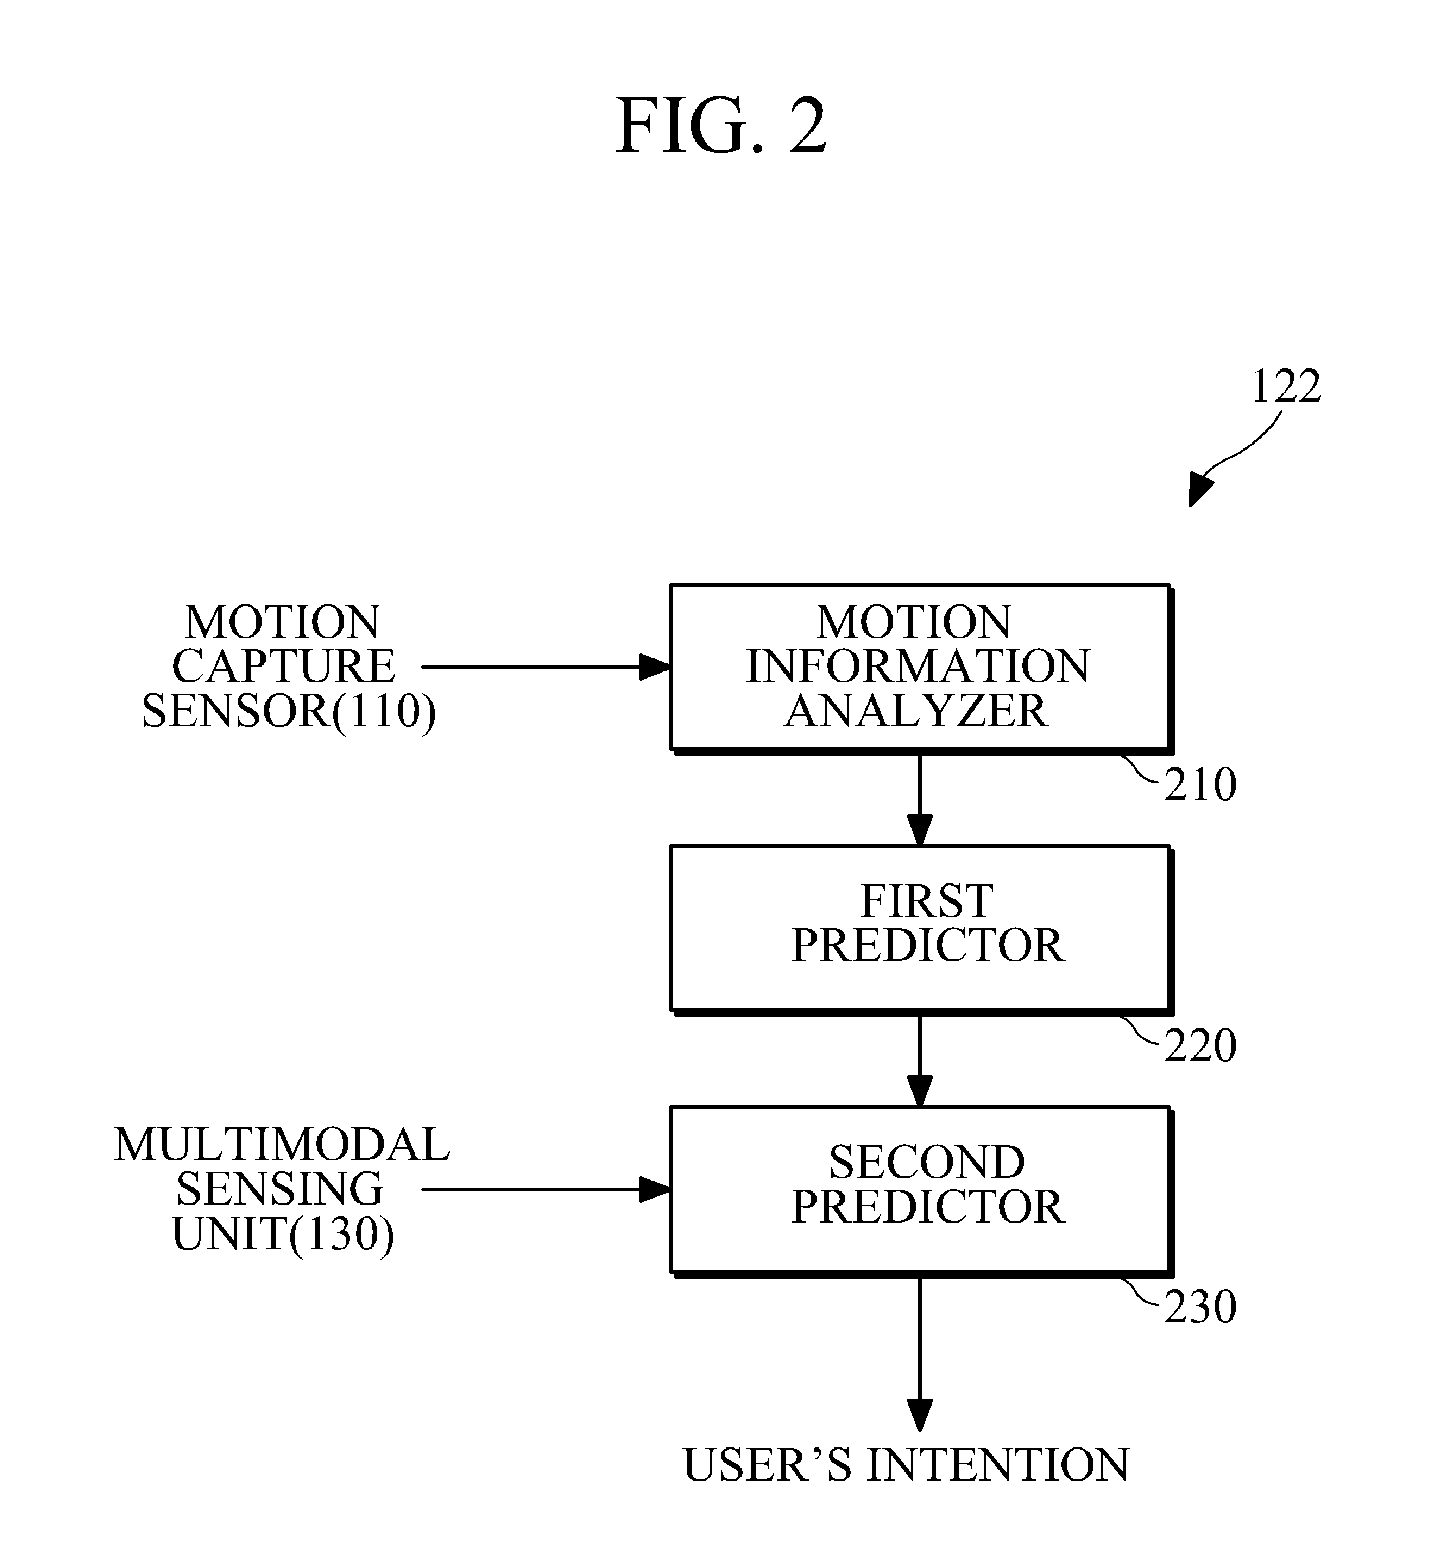 Apparatus and method for predicting user's intention based on multimodal information